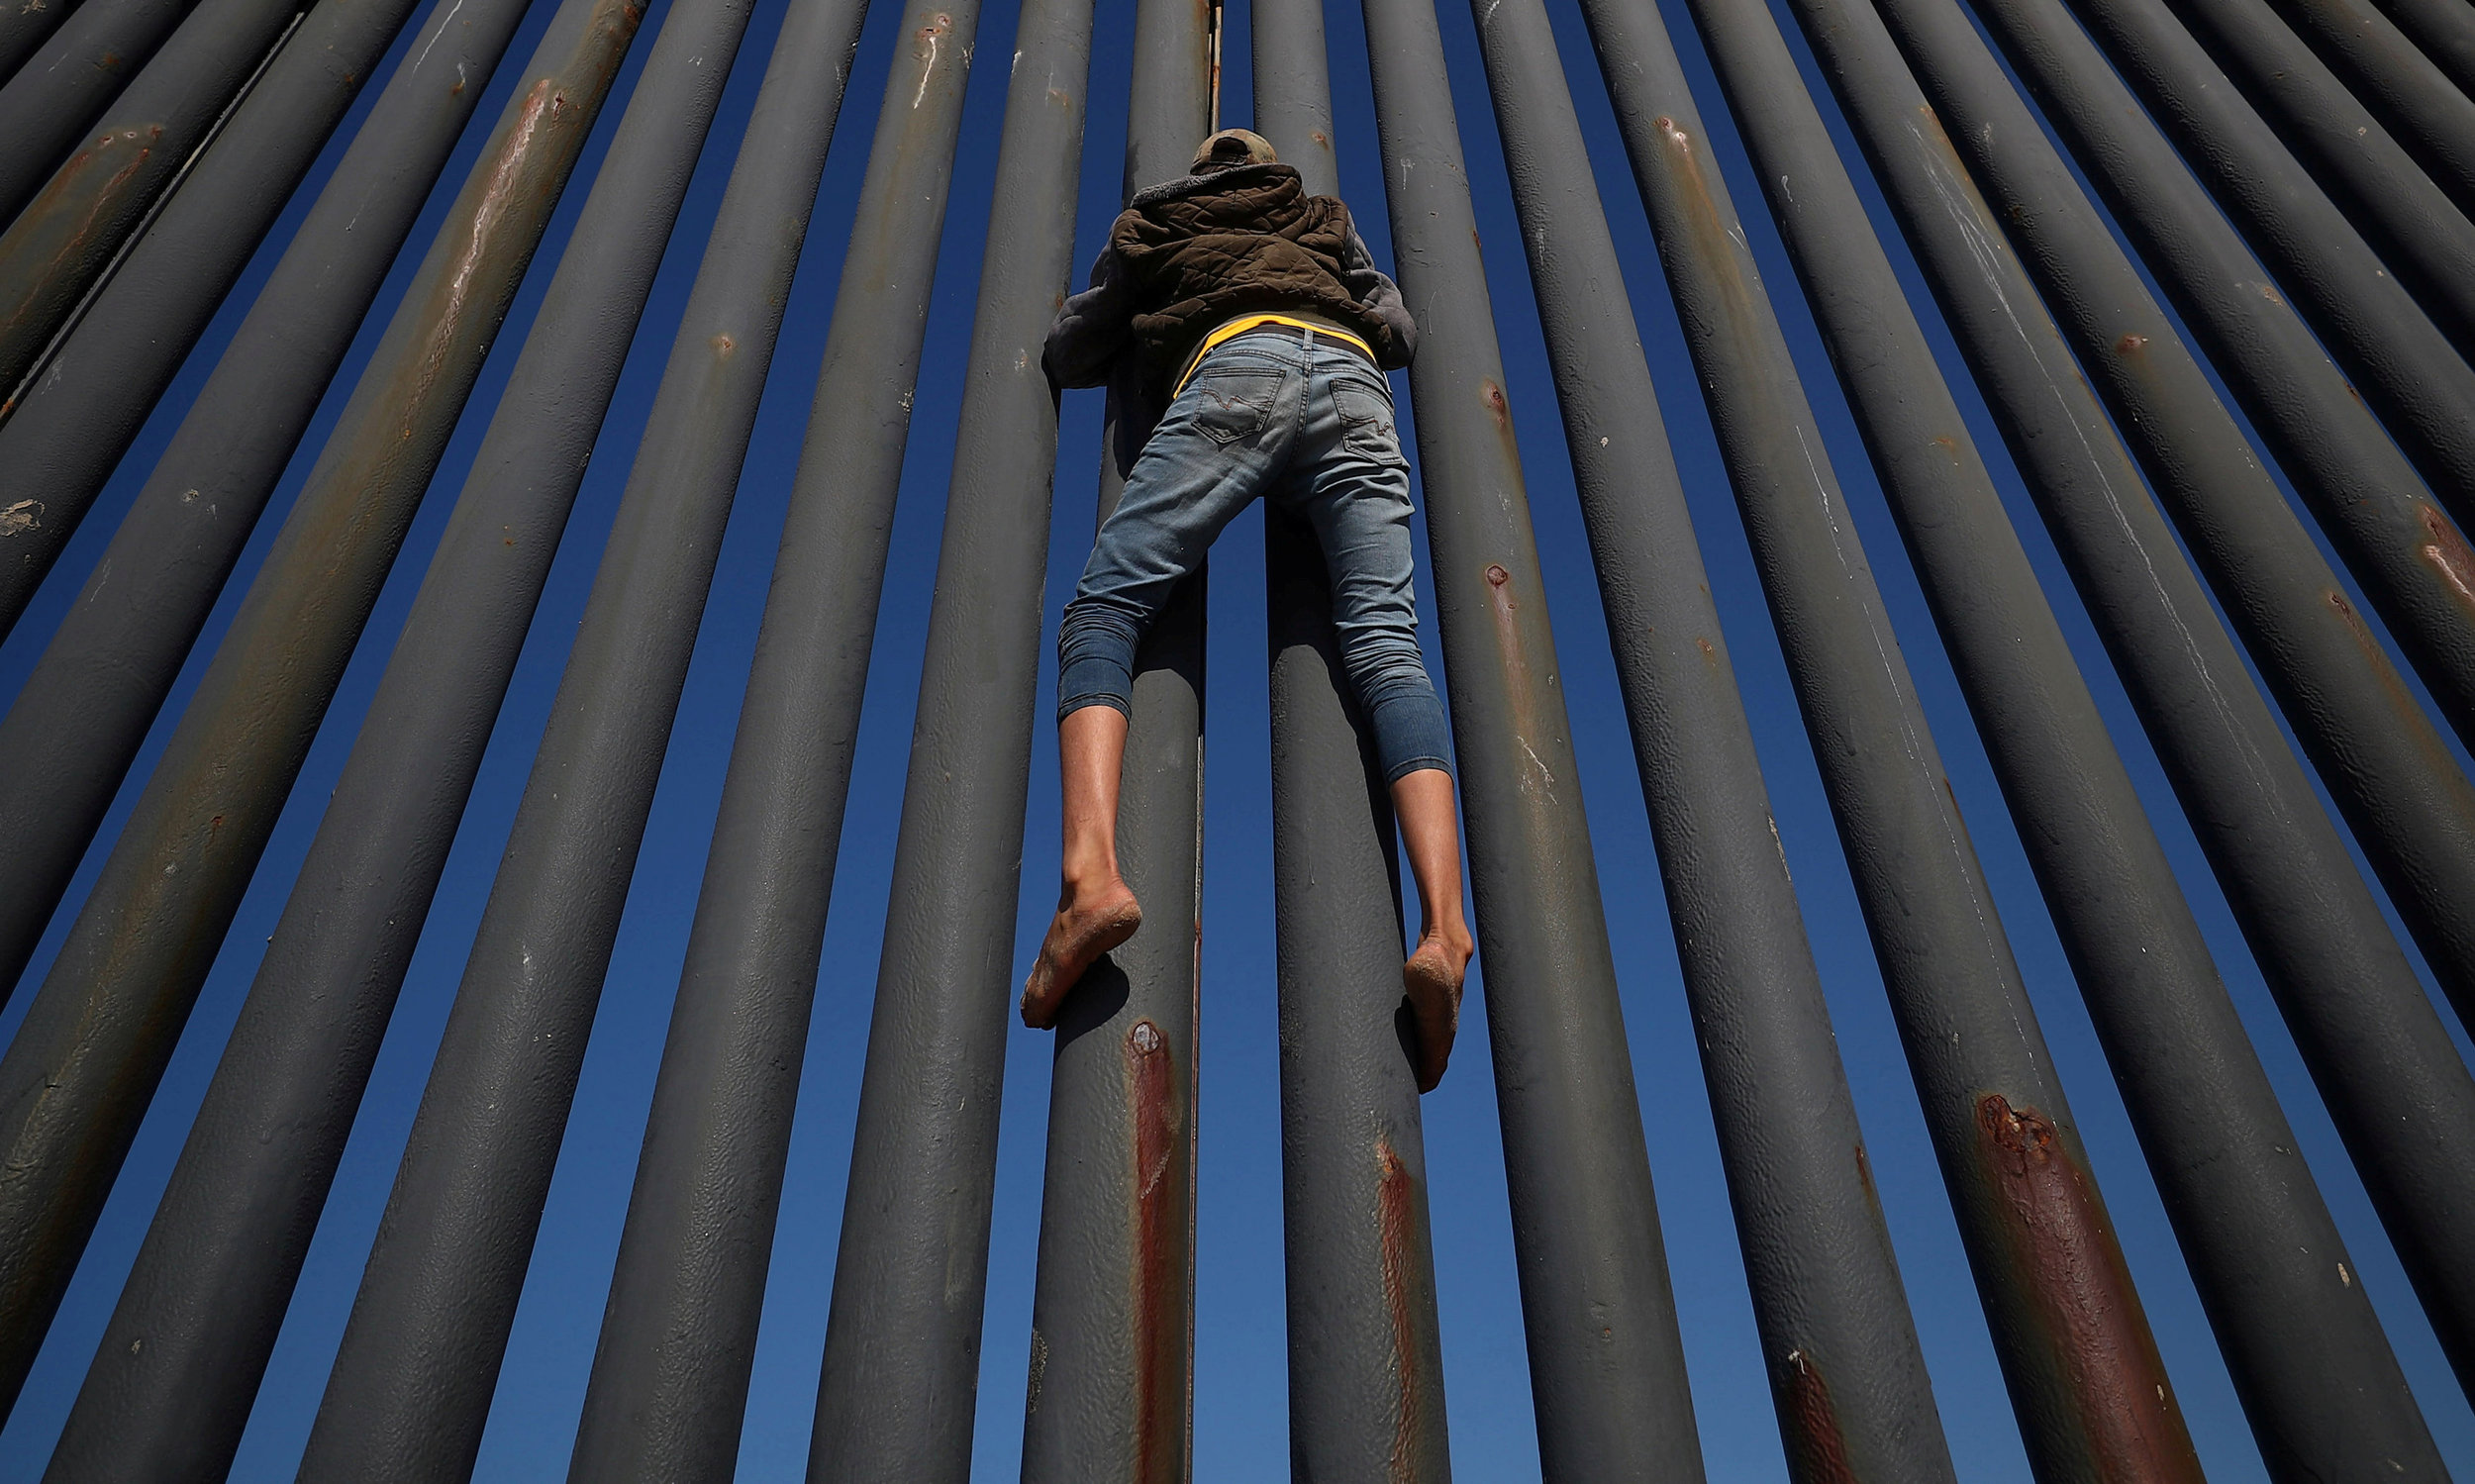  A migrant, part of a caravan of thousands from Central America trying to reach the United States, climbs the border fence between Mexico and the United States, in Tijuana, Mexico.
Photo by Hannah McKay, 18 November 2018
 